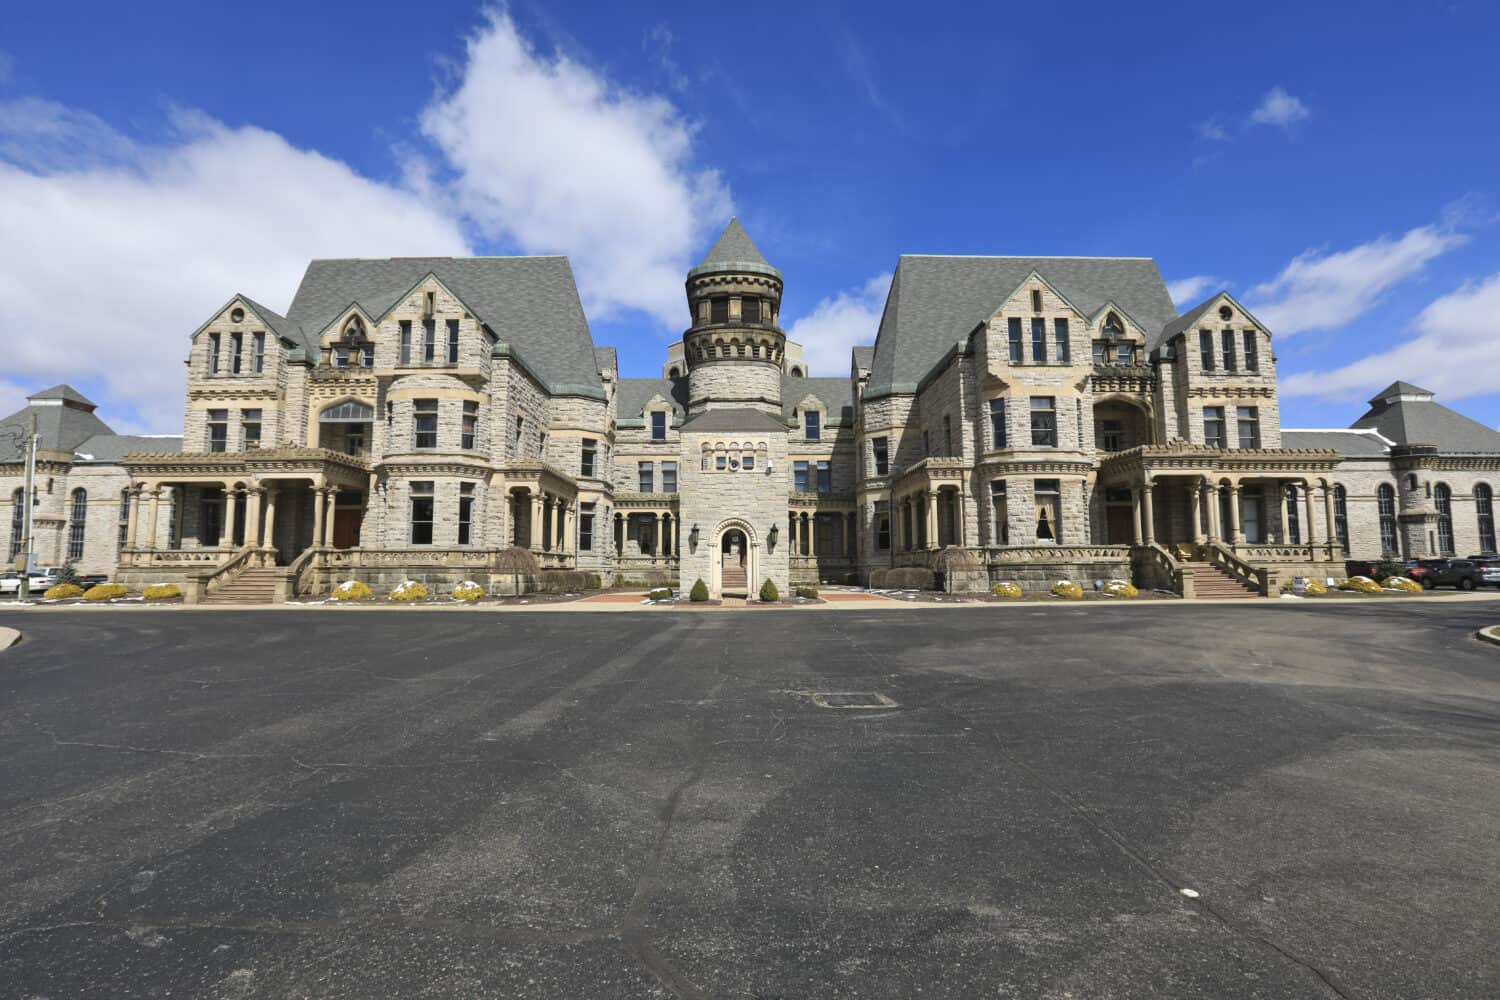 The Ohio State Reformatory in Mansfield Ohio is on the register of historical places. Tours operate daily, making it a popular tourist attraction. by aceshot1